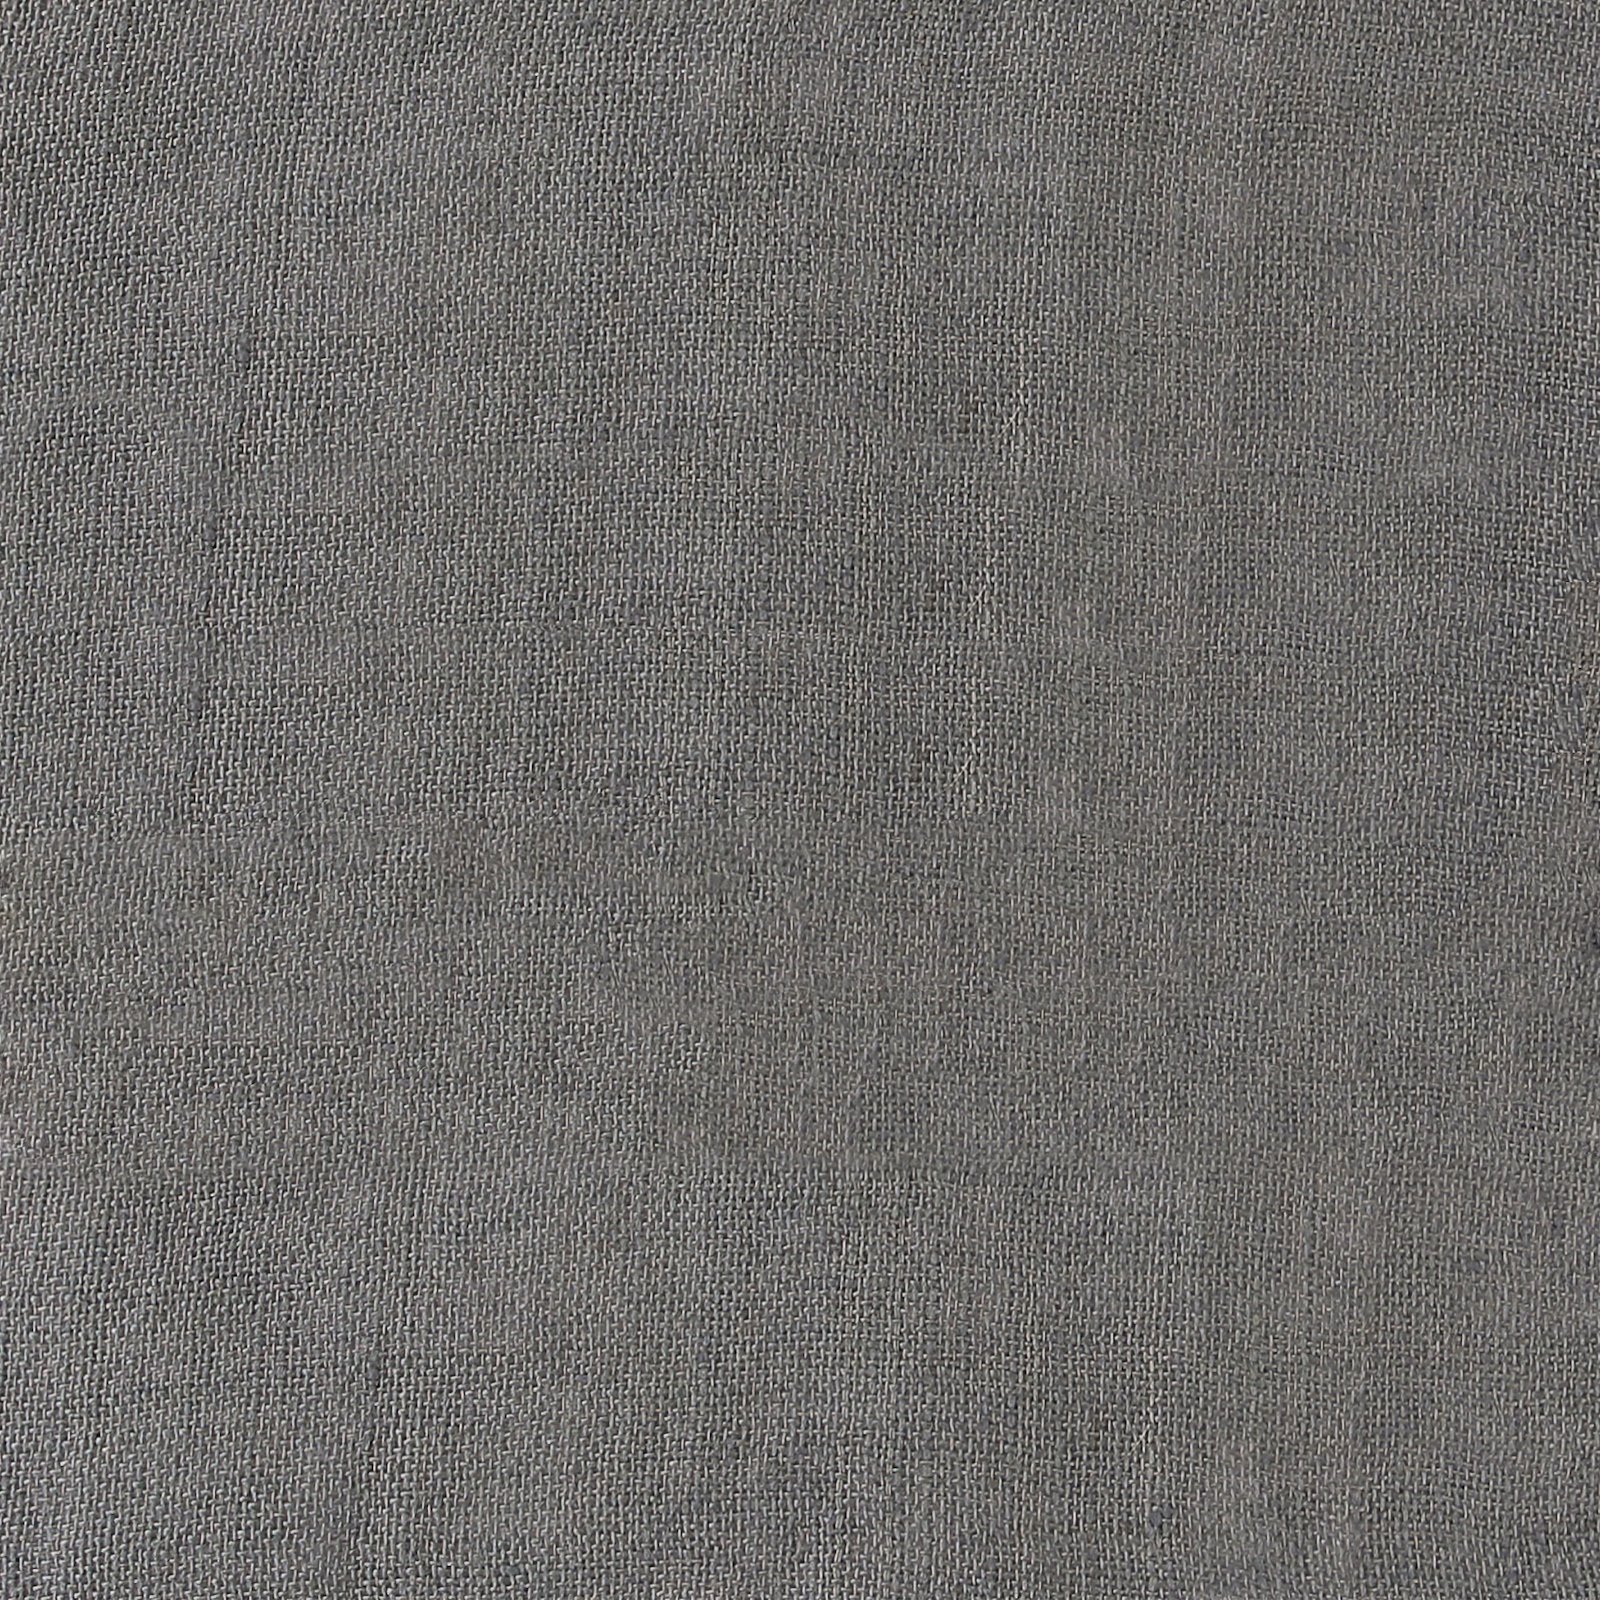 Coarse hessian light grey 9190_pack_solid